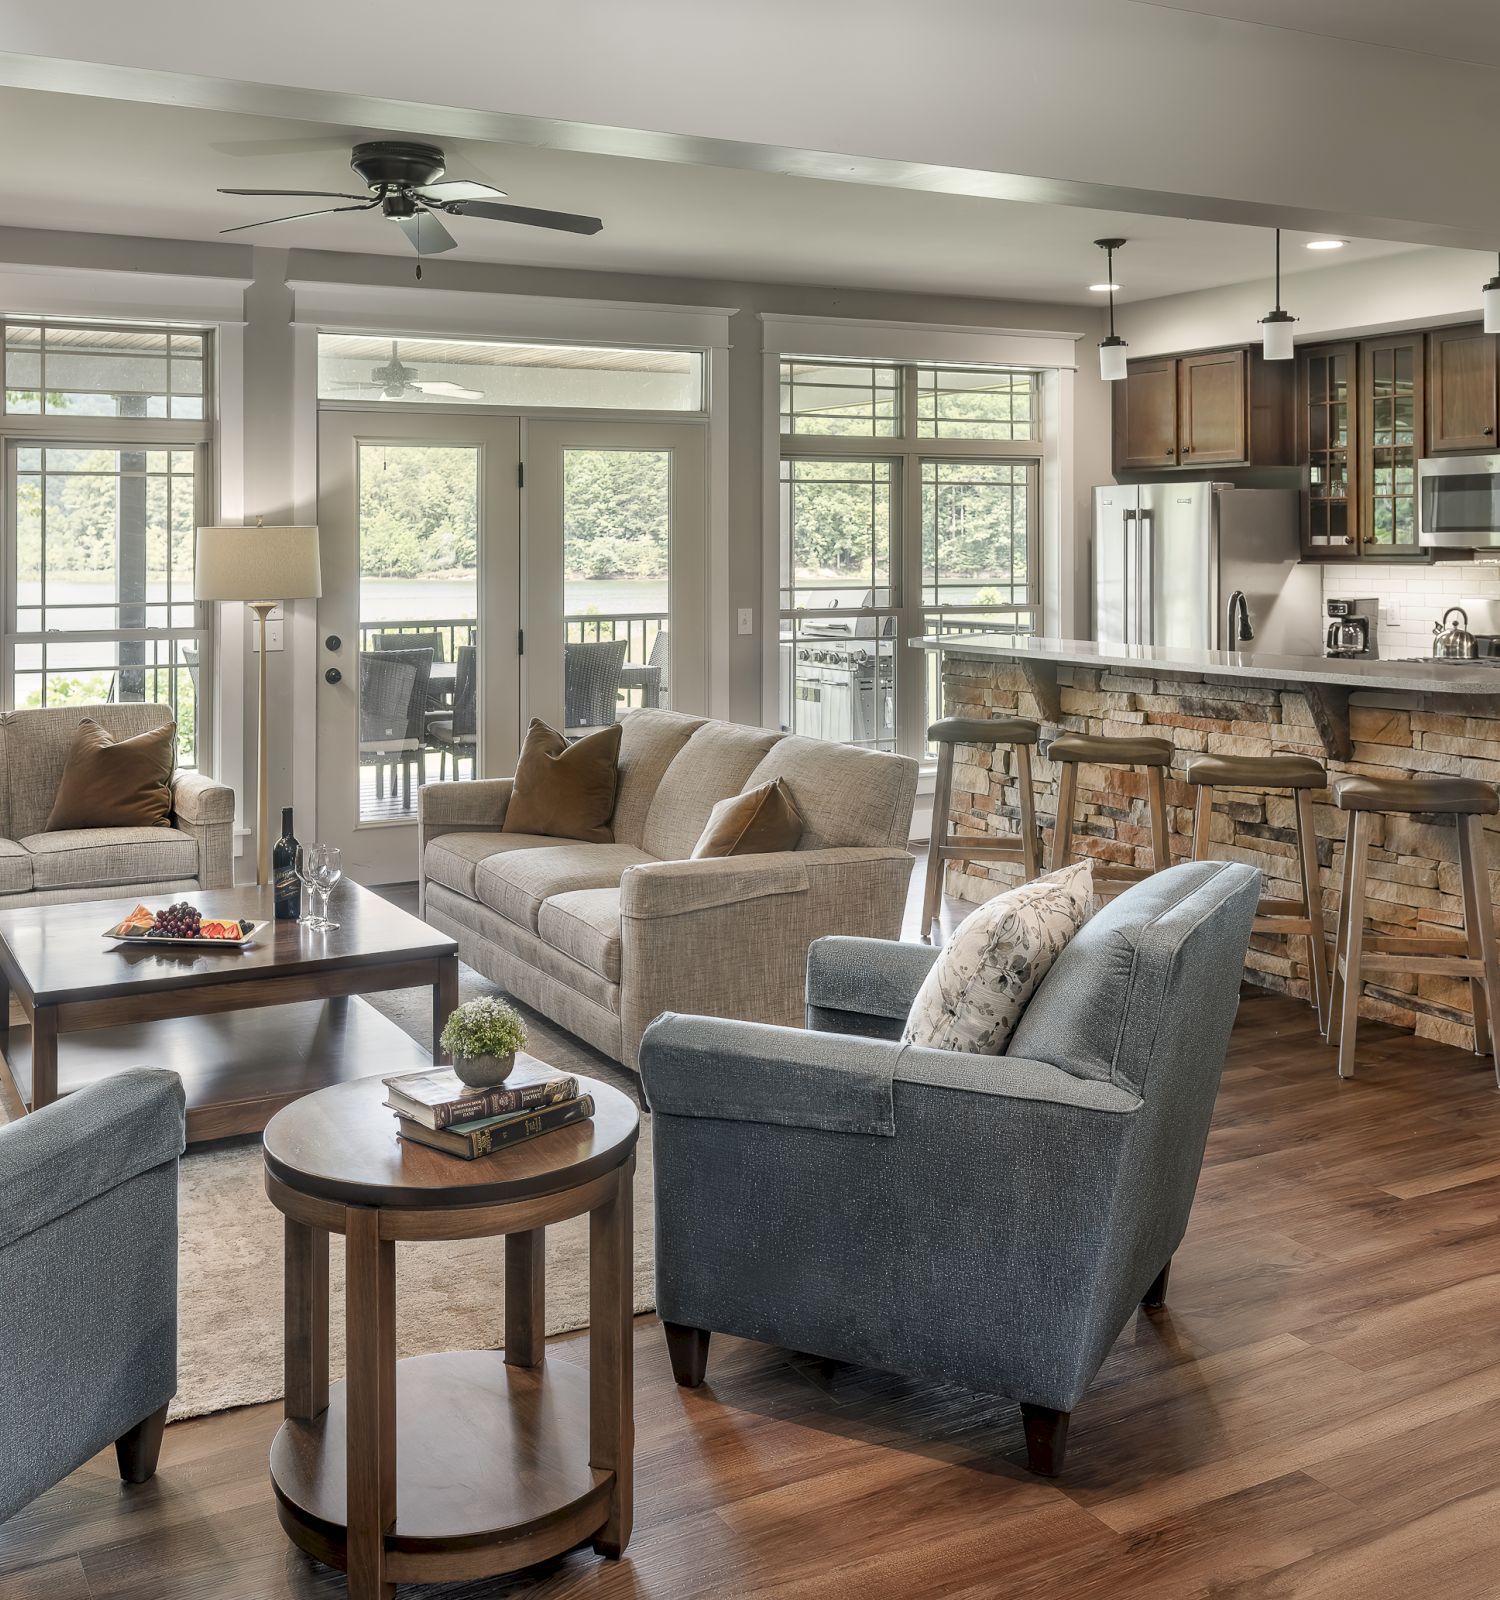 A modern living room and kitchen with hardwood floors, grey and beige furniture, large windows, and bar seating in an open-concept design.